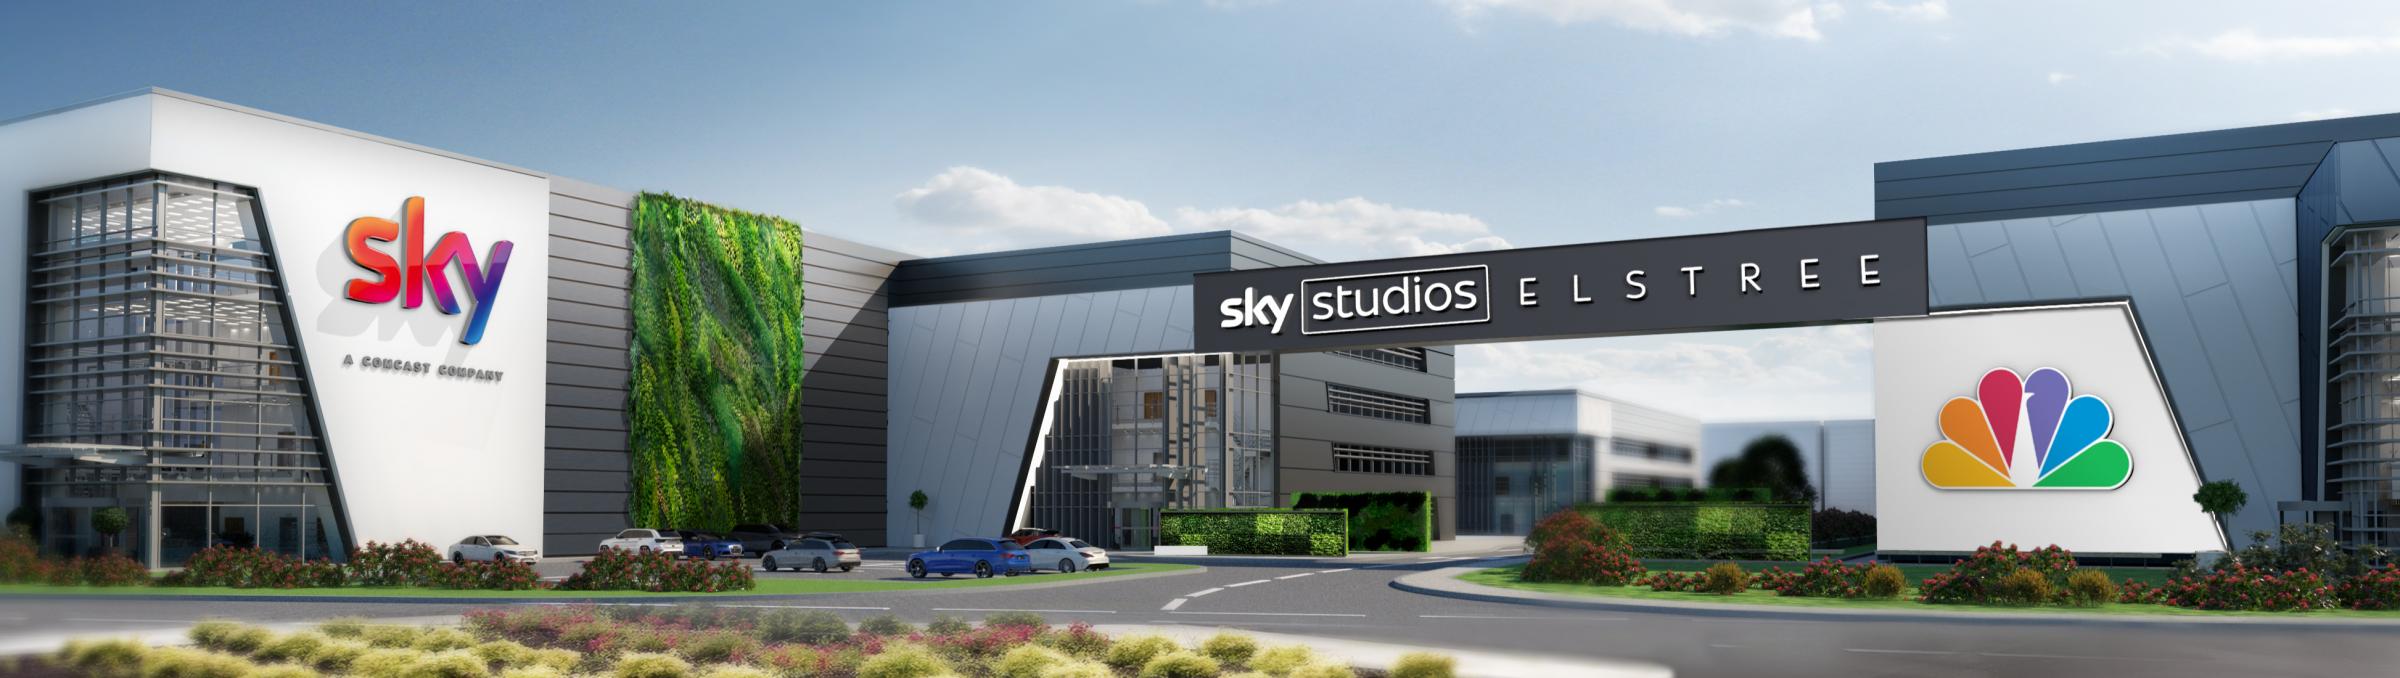 Sky Studios Elstree on land between Rowley Lane and the A1